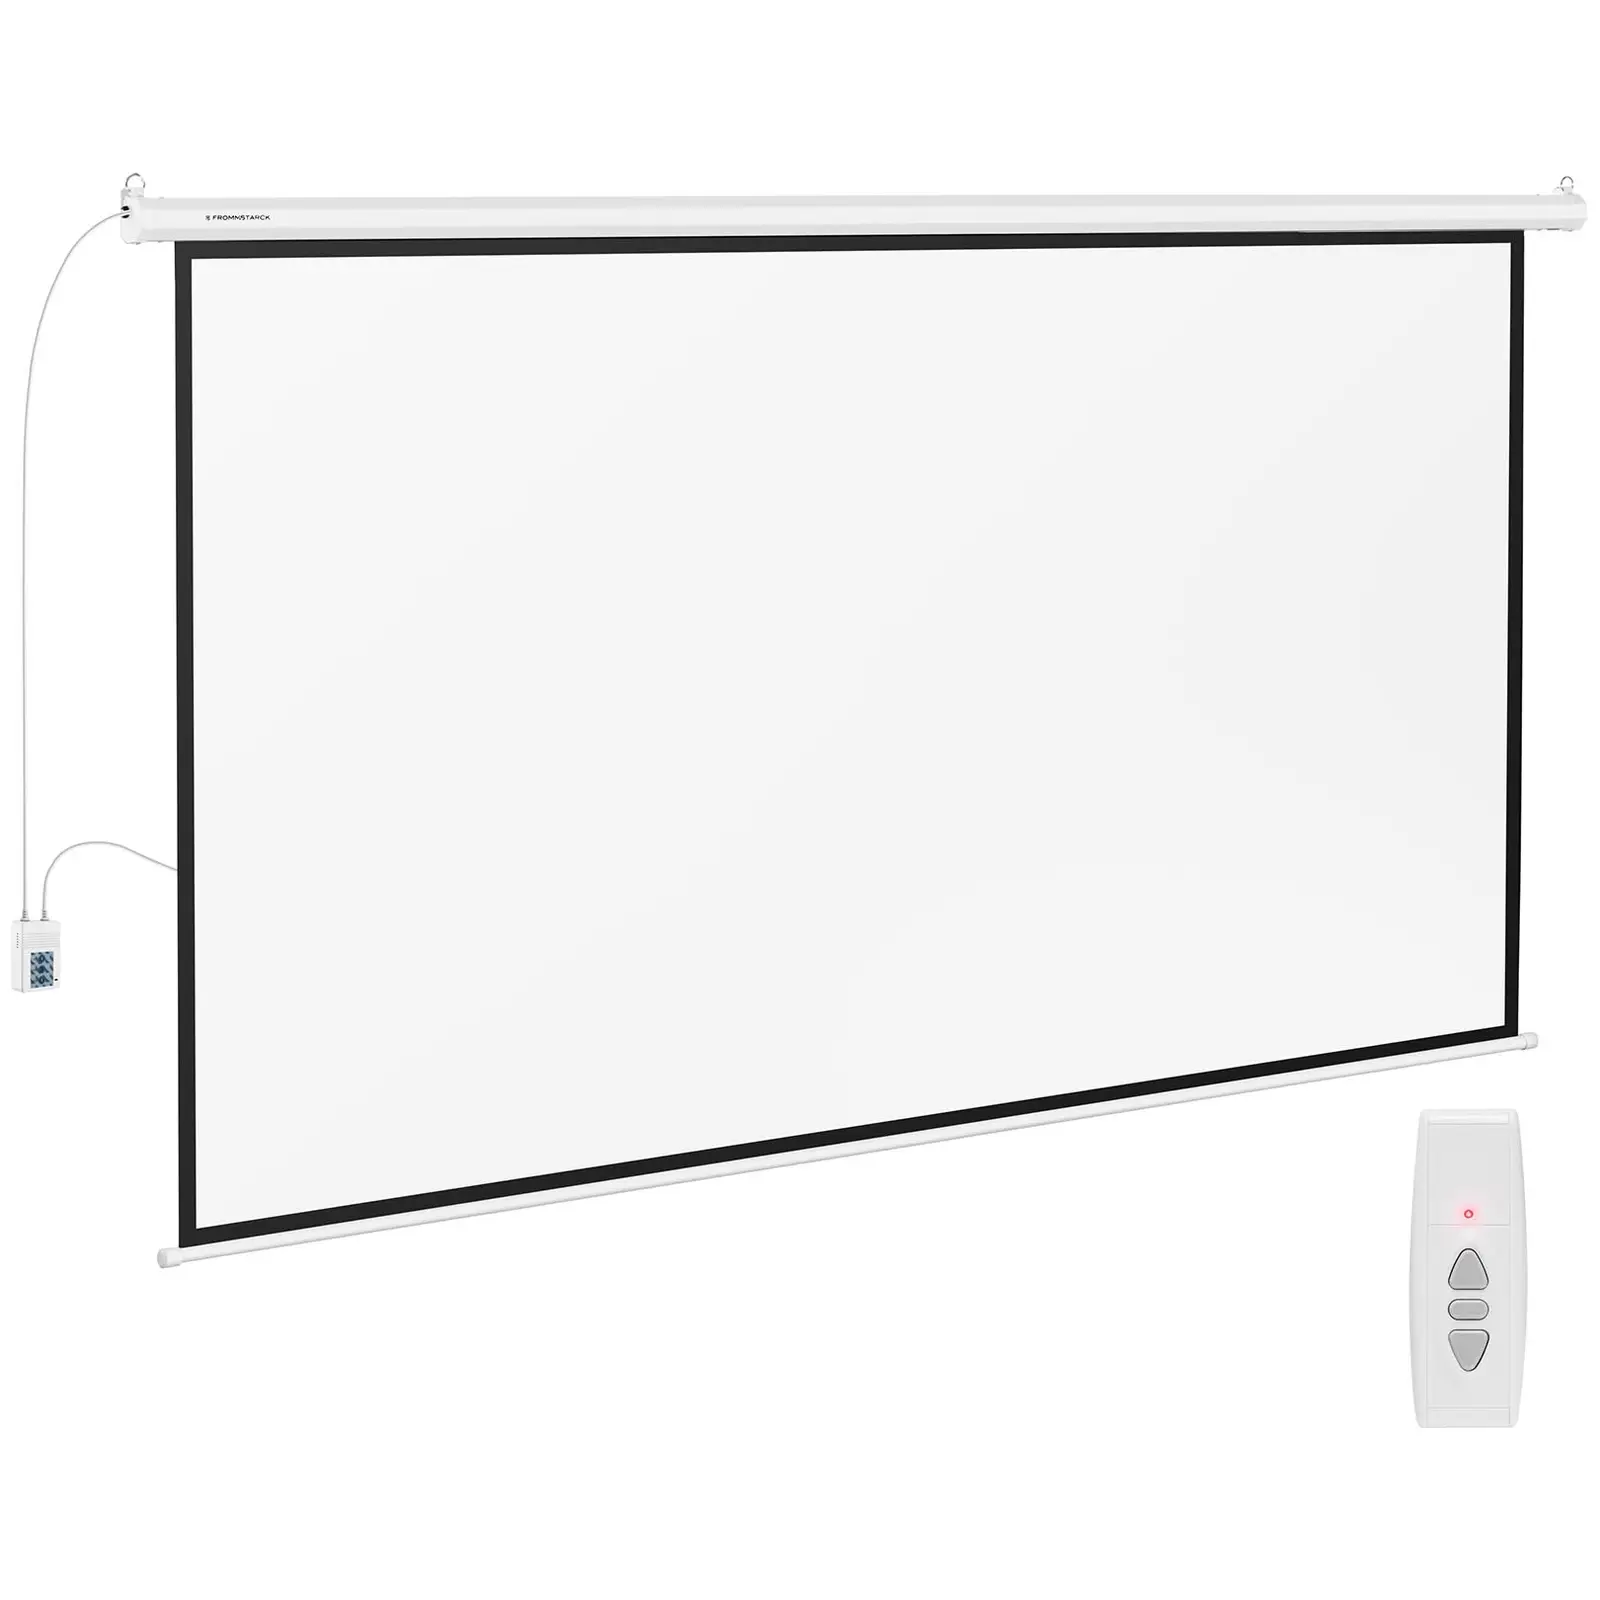 Projection Screen - 302 x 201 cm - 16:9